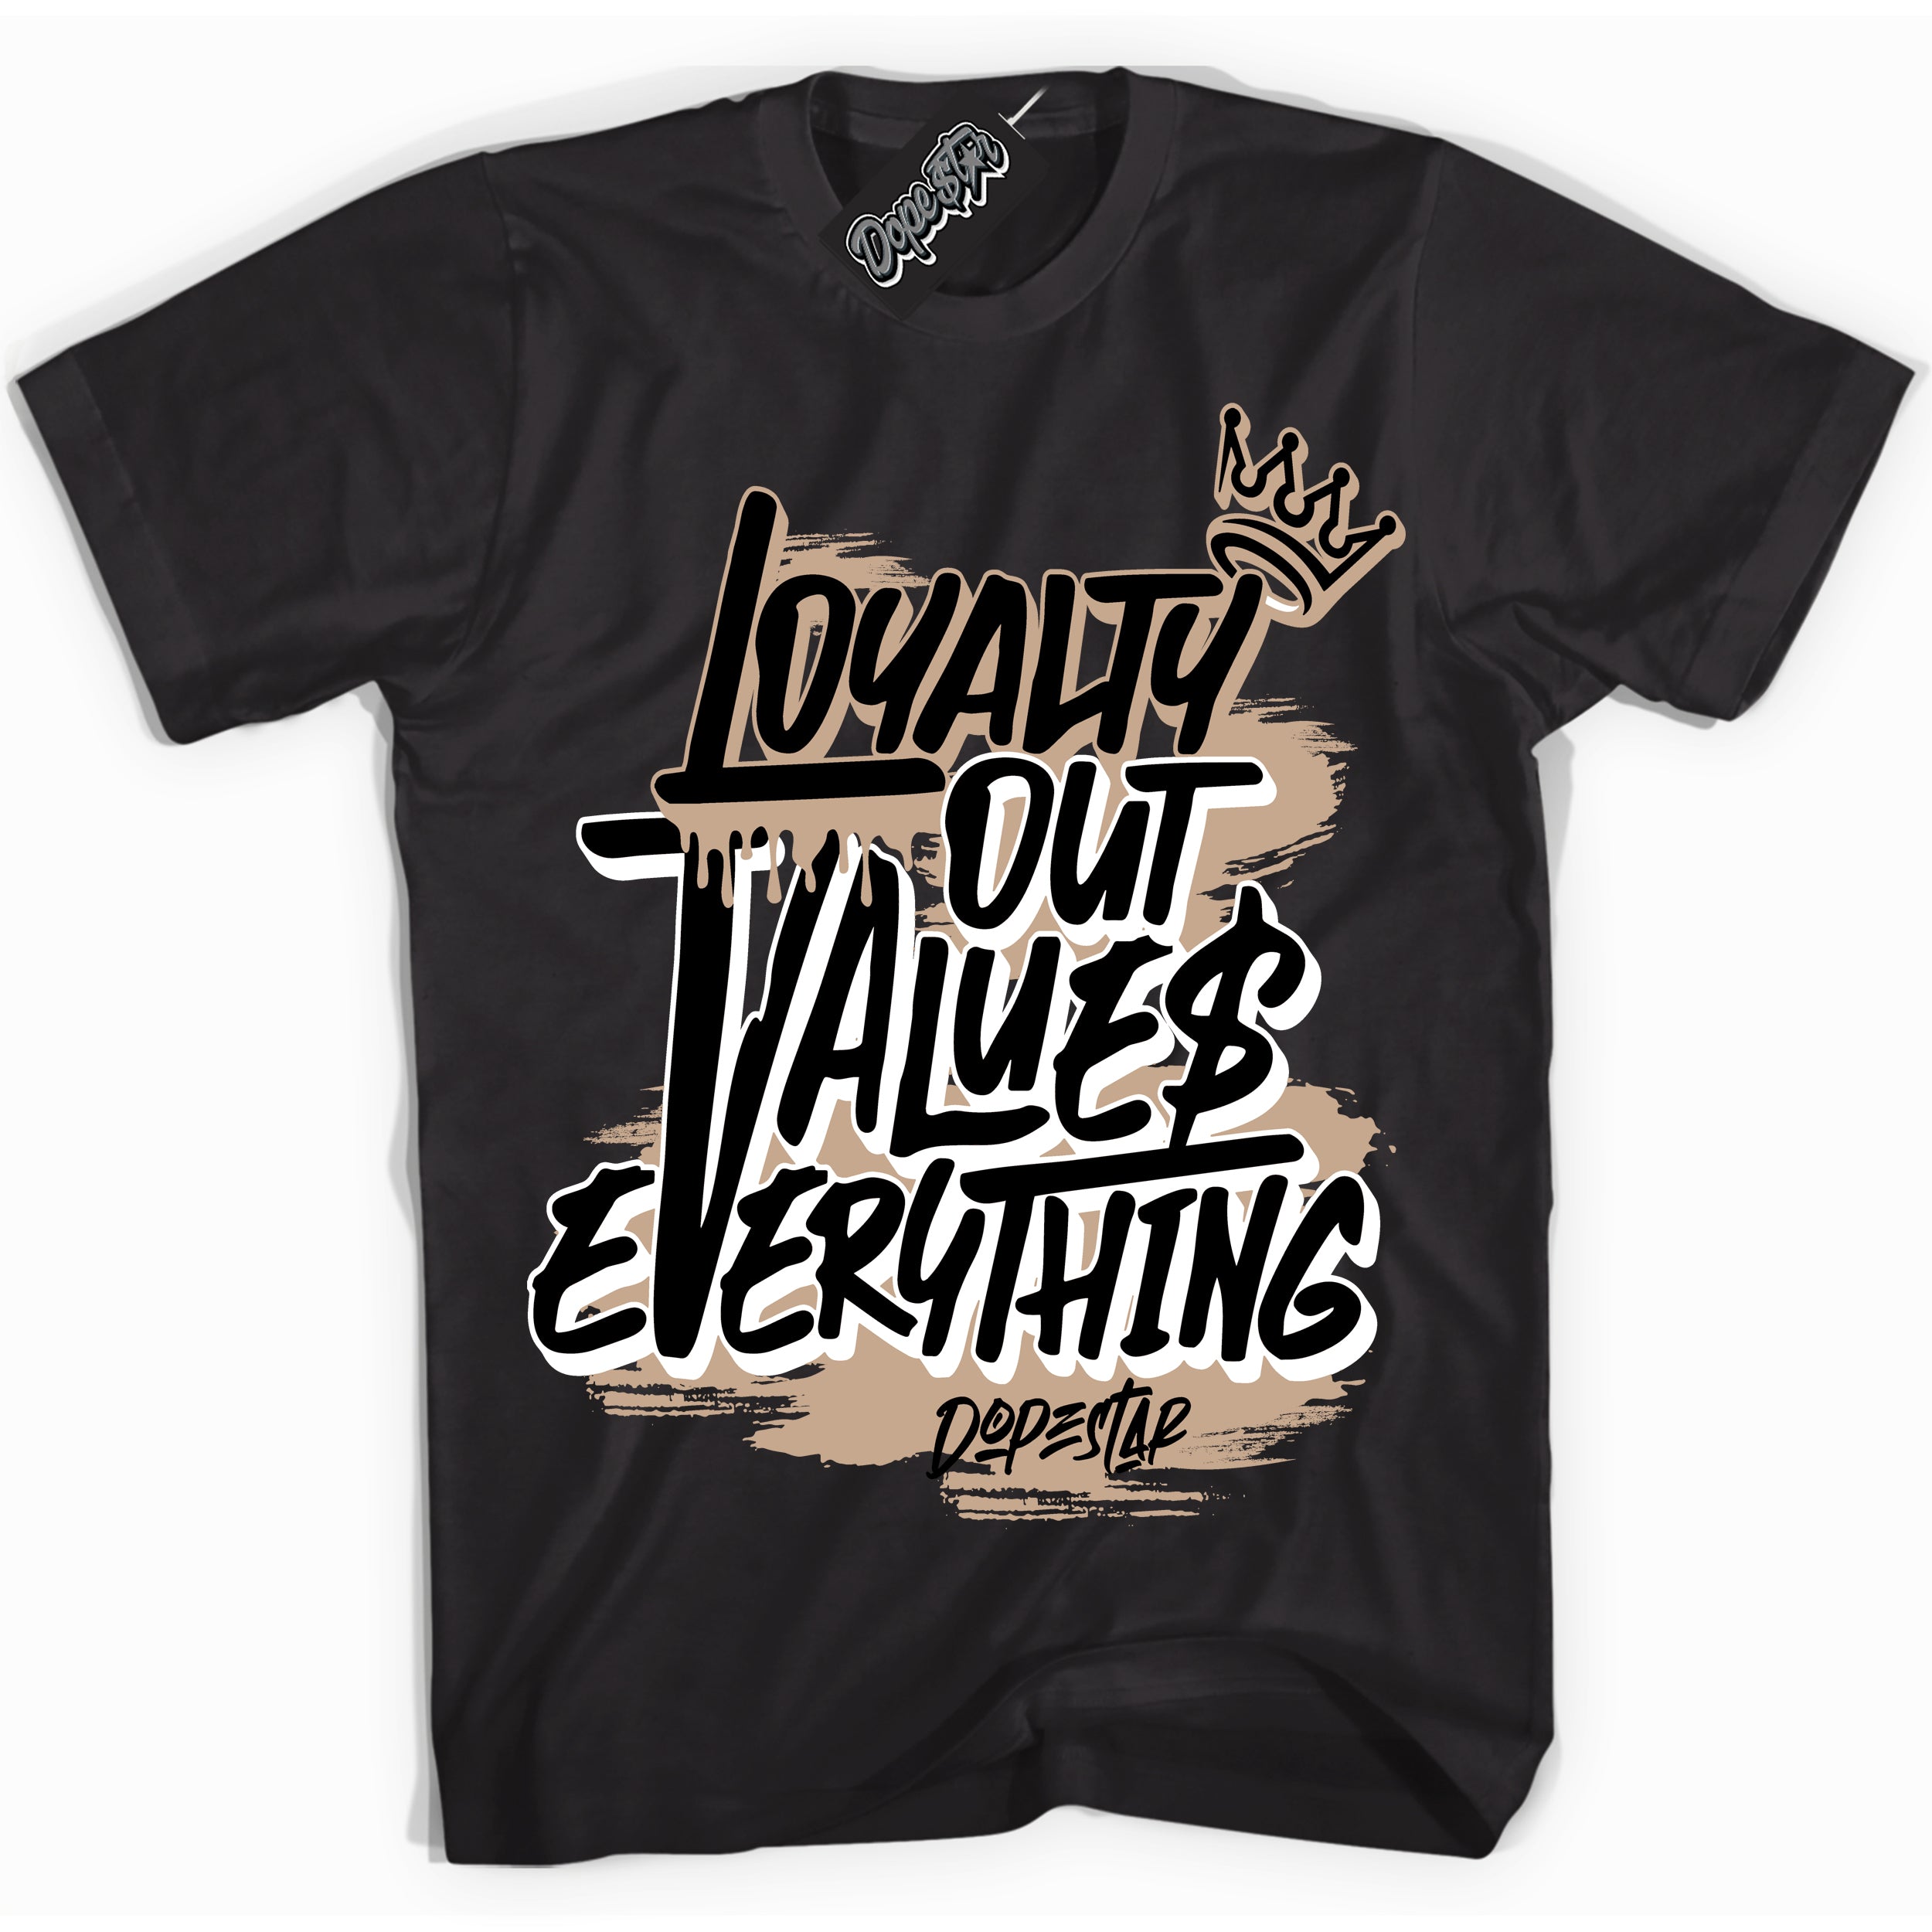 Cool Black Shirt with “ Loyalty Out Values Everything” design that perfectly matches Desert 1s Sneakers.